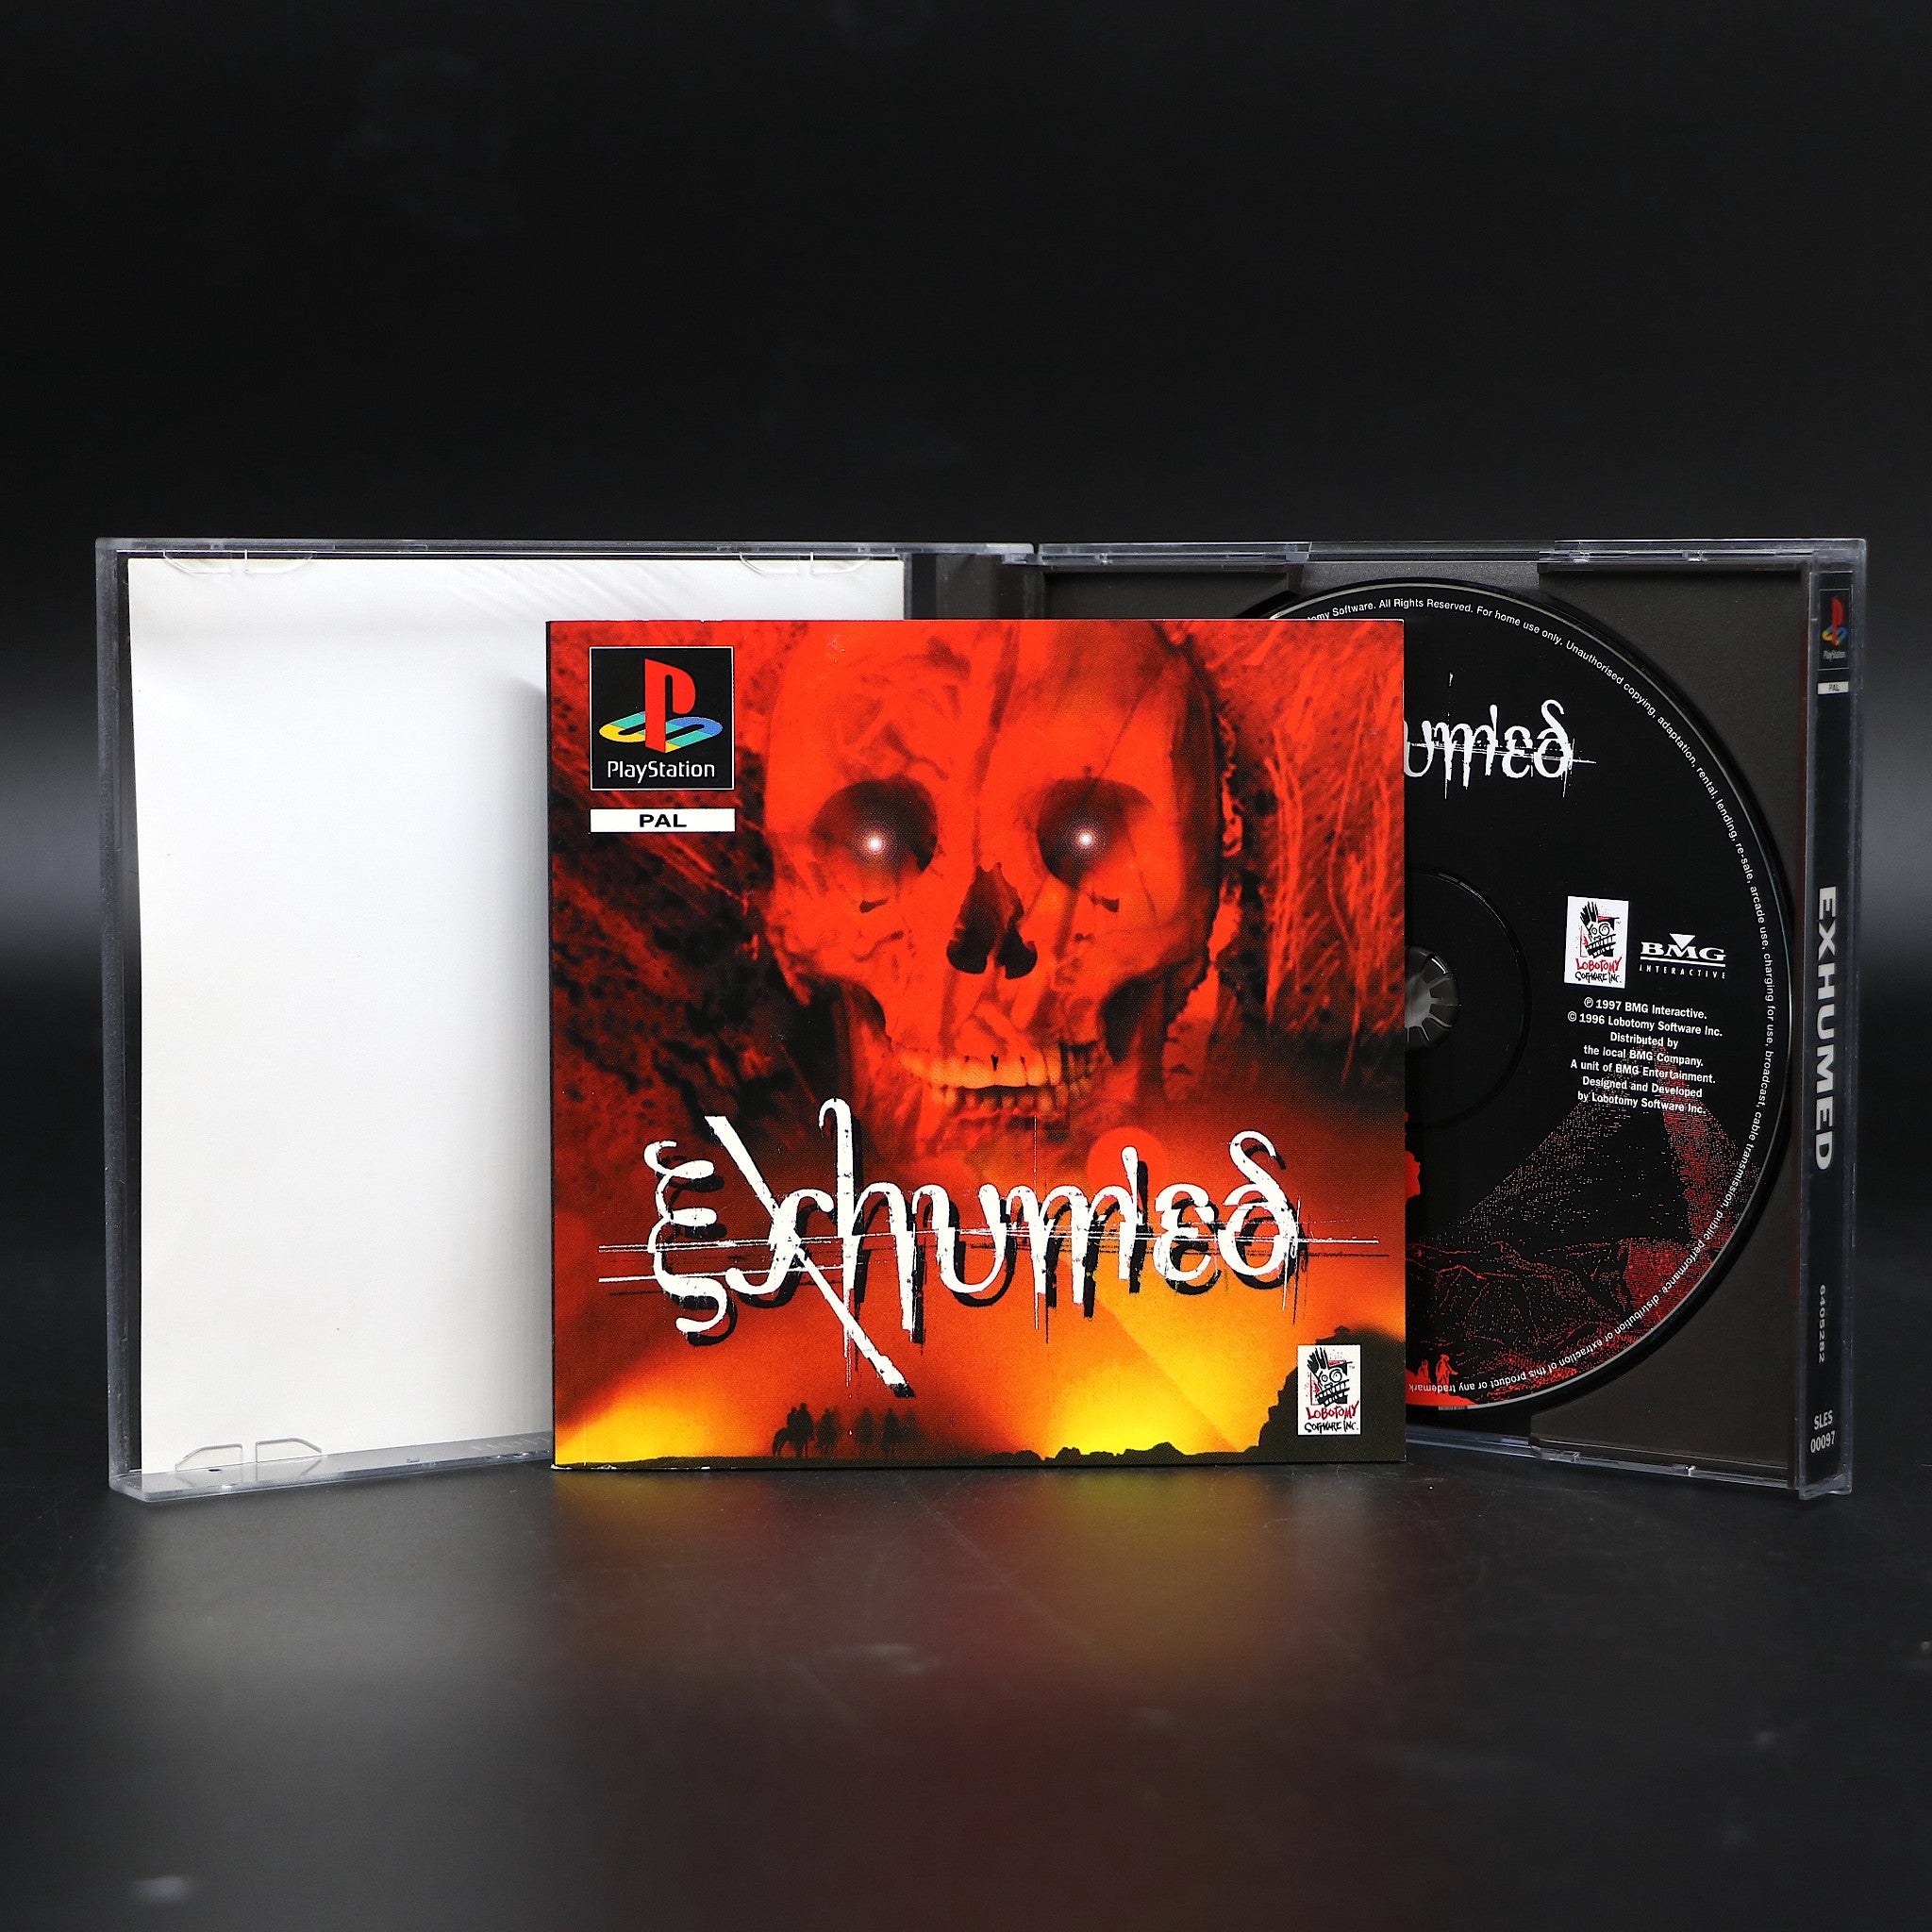 Exhumed | Sony PS1 PSOne Playstation Game | Collectable Condition!